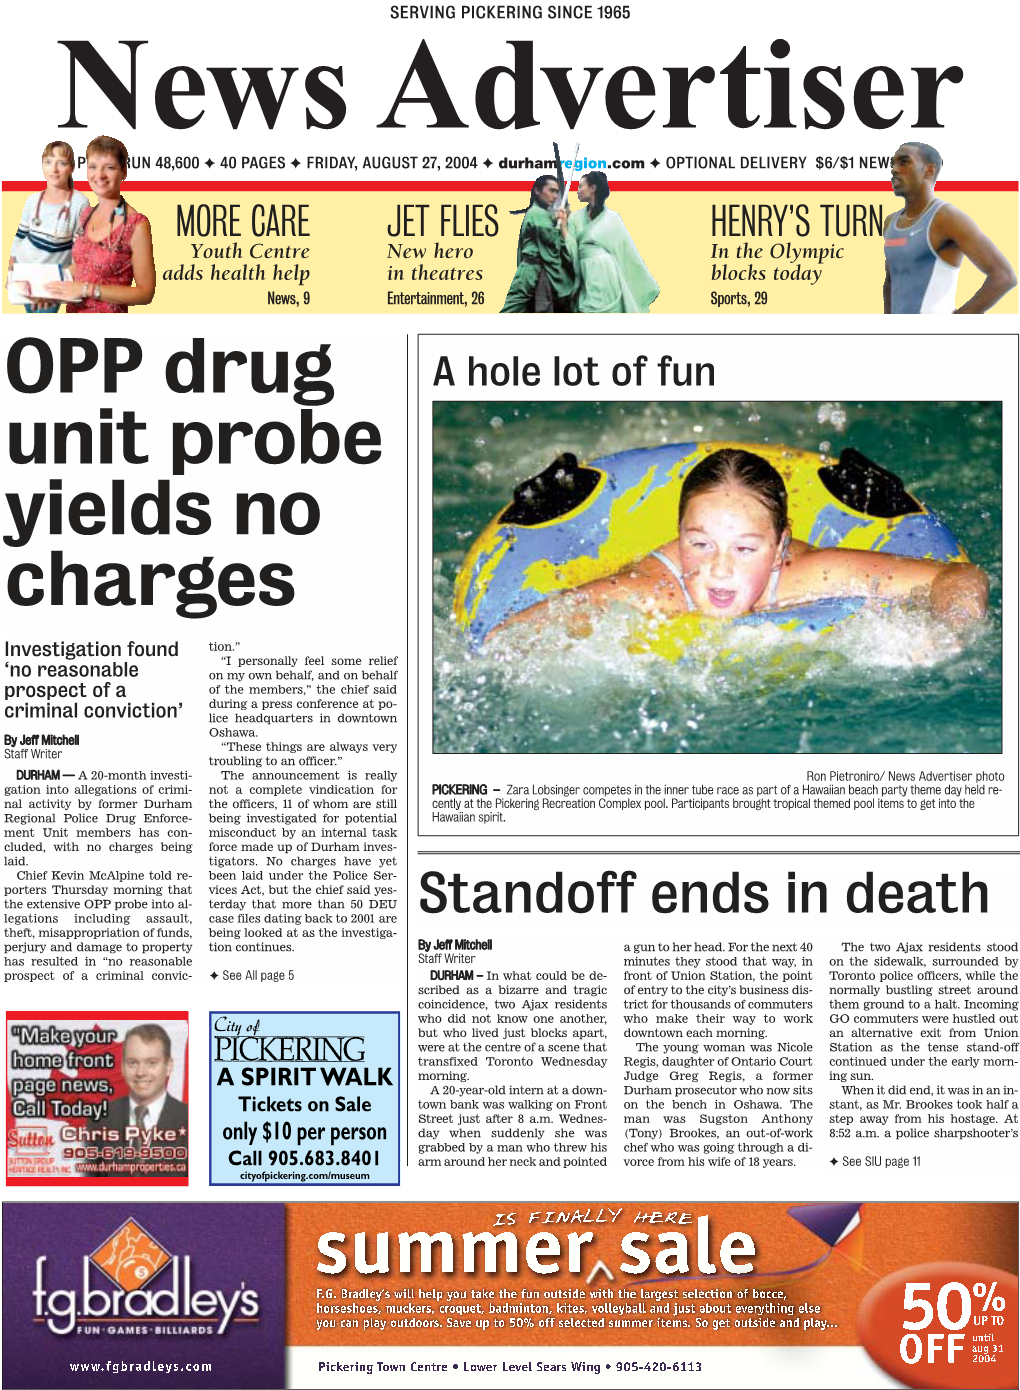 OPP Drug Unit Probe Yields No Charges